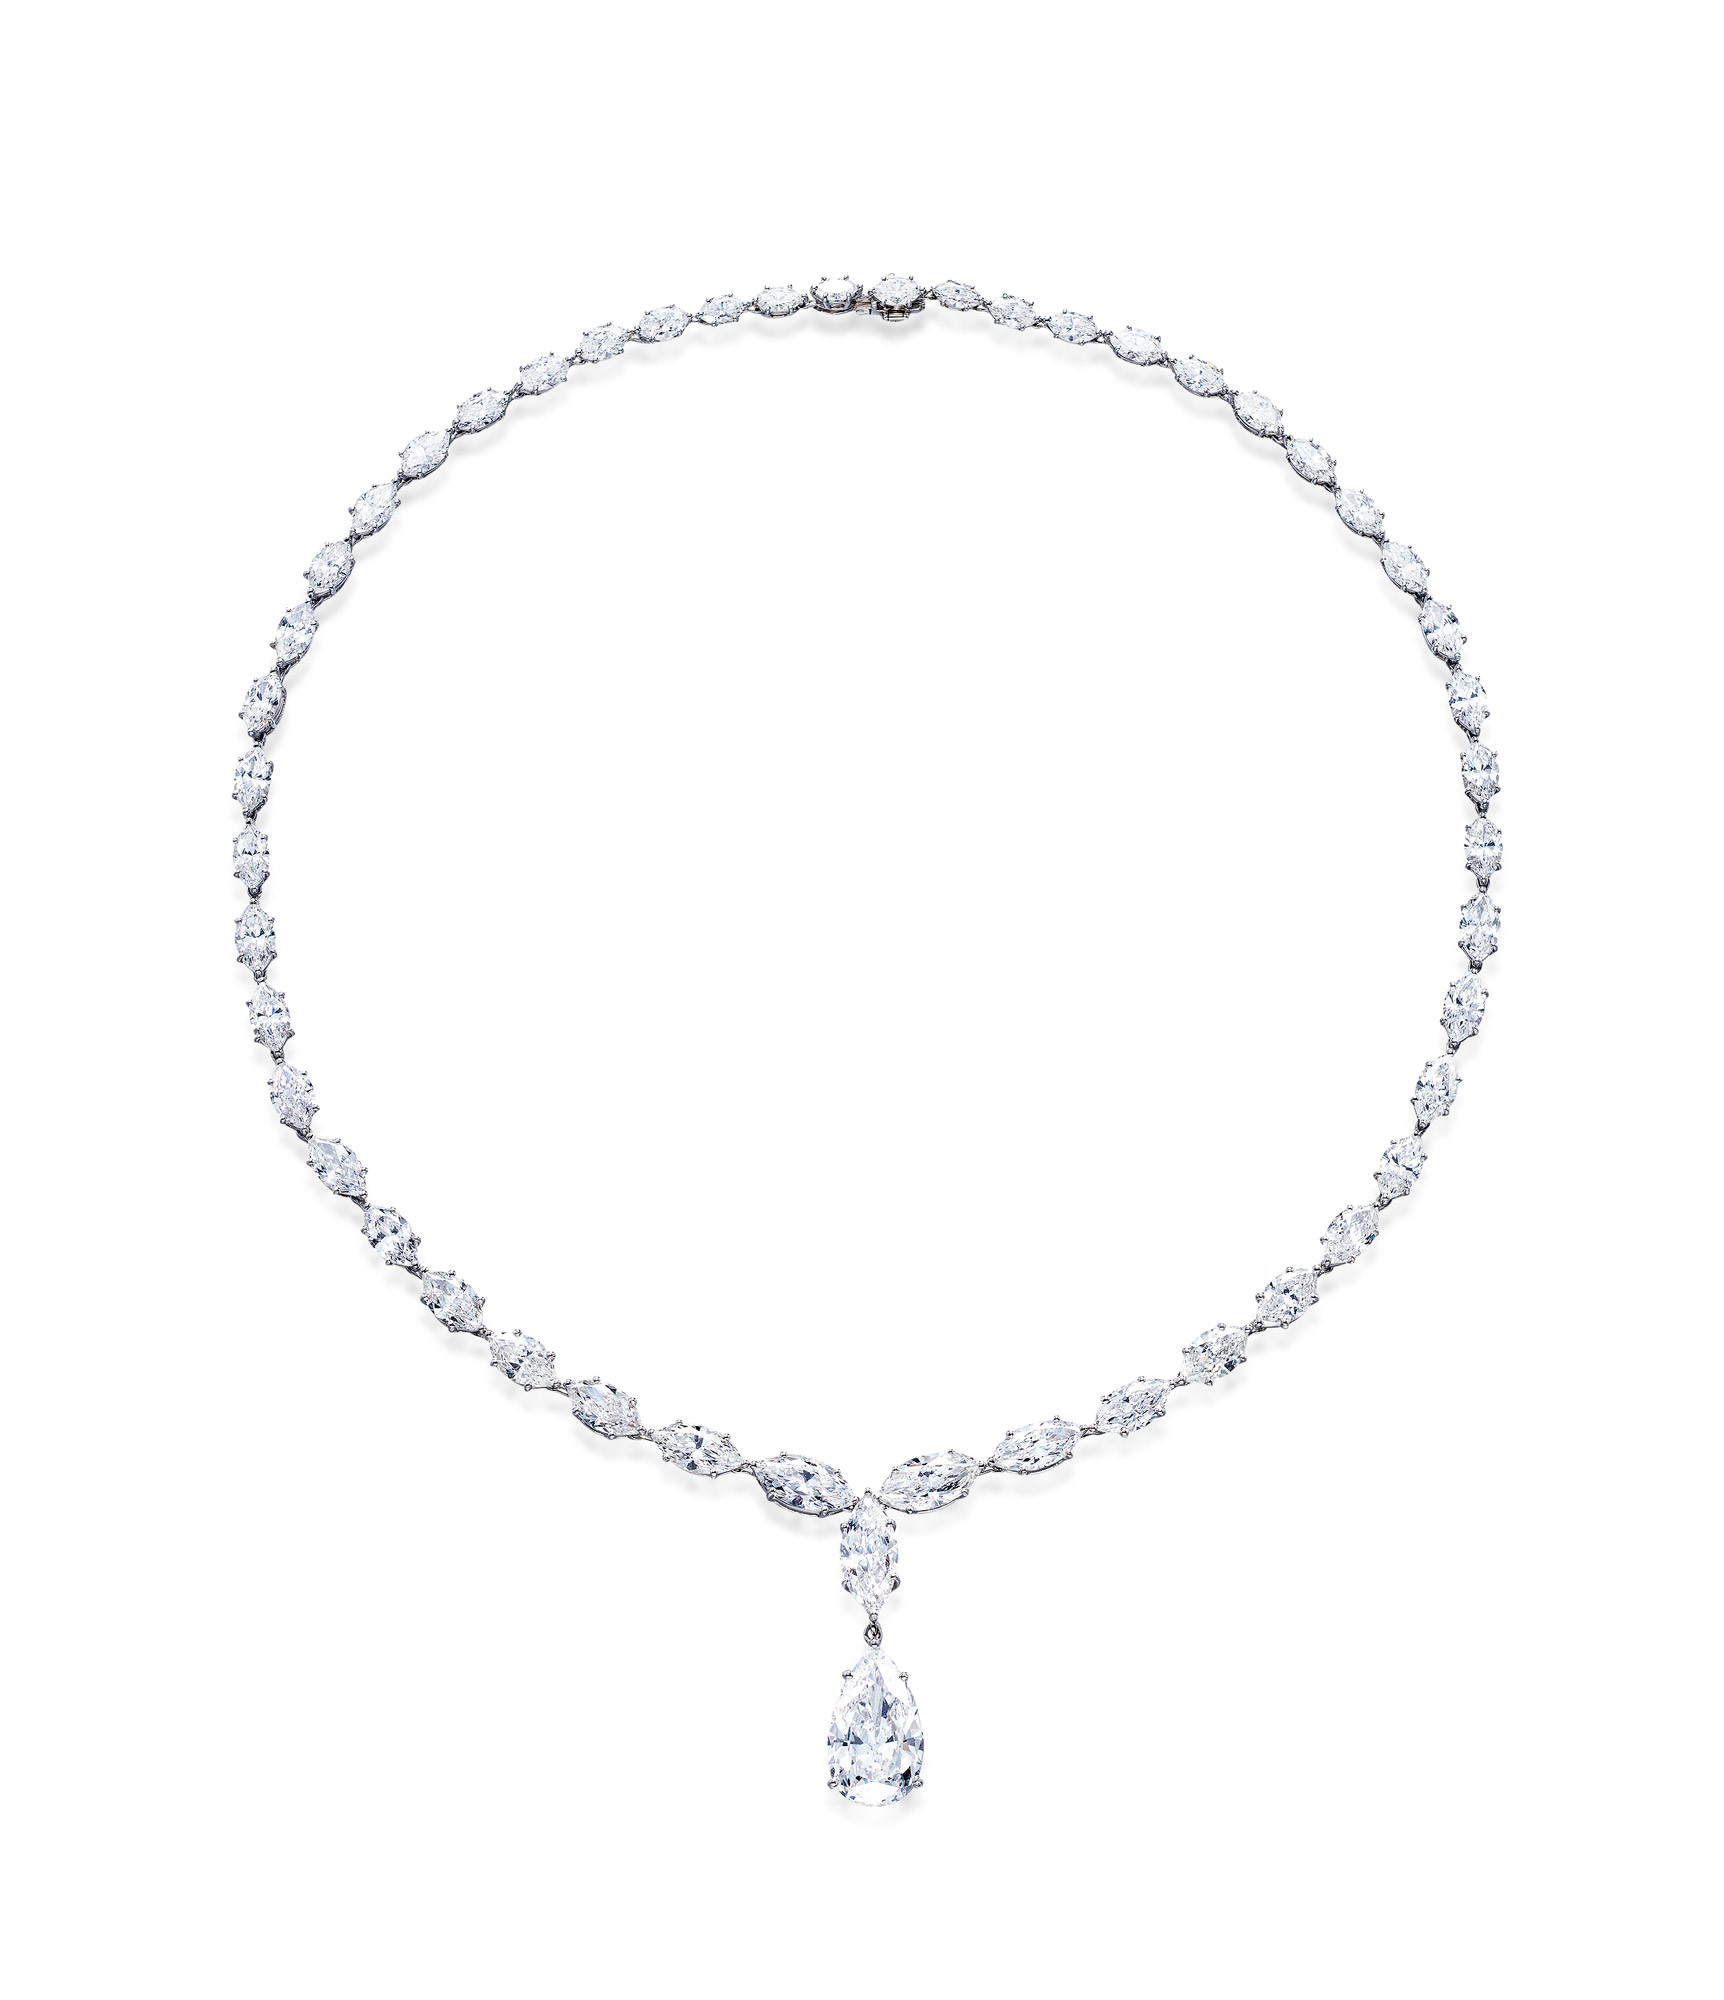 A 7.13 CARAT D COLOR, TYPE IIA DIAMOND AND DIAMOND NECKLACE, BY GRAFF